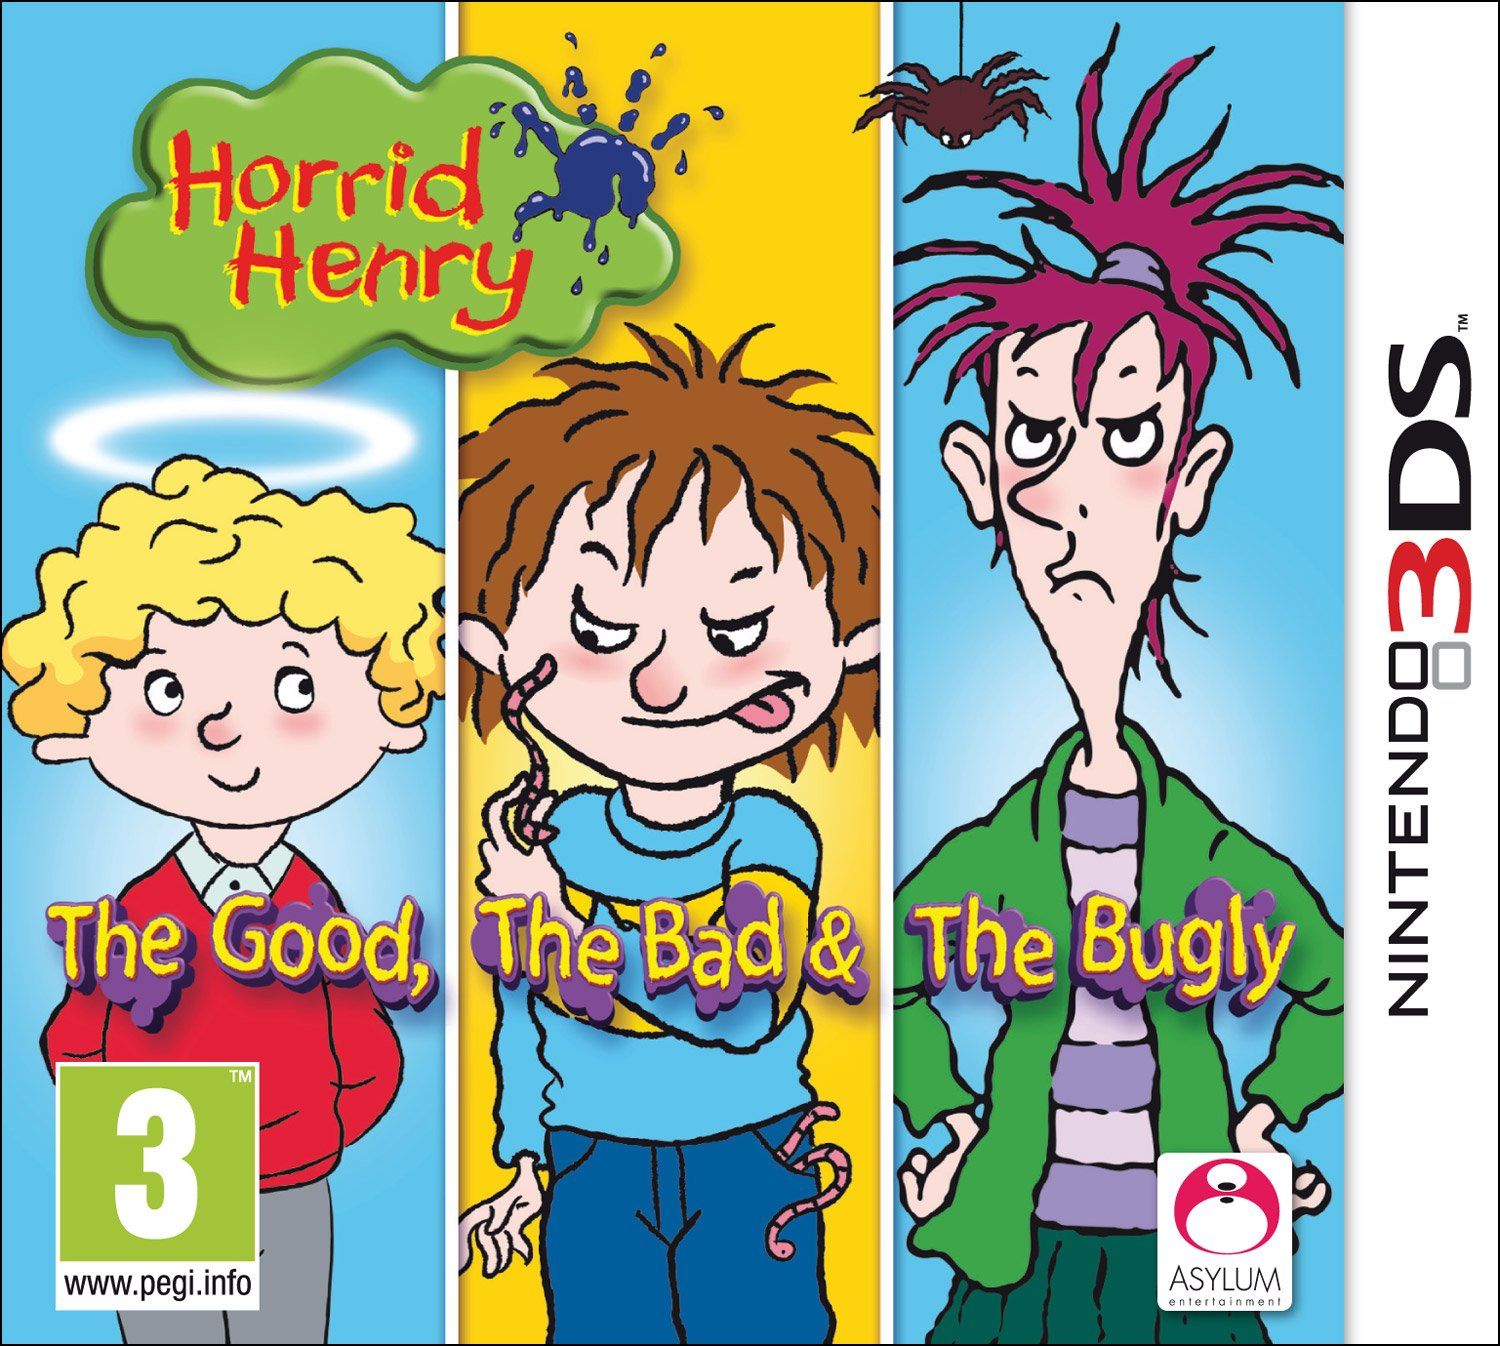 Horrid Henry: The Good, The Bad and The Bugly Nintendo 3DS